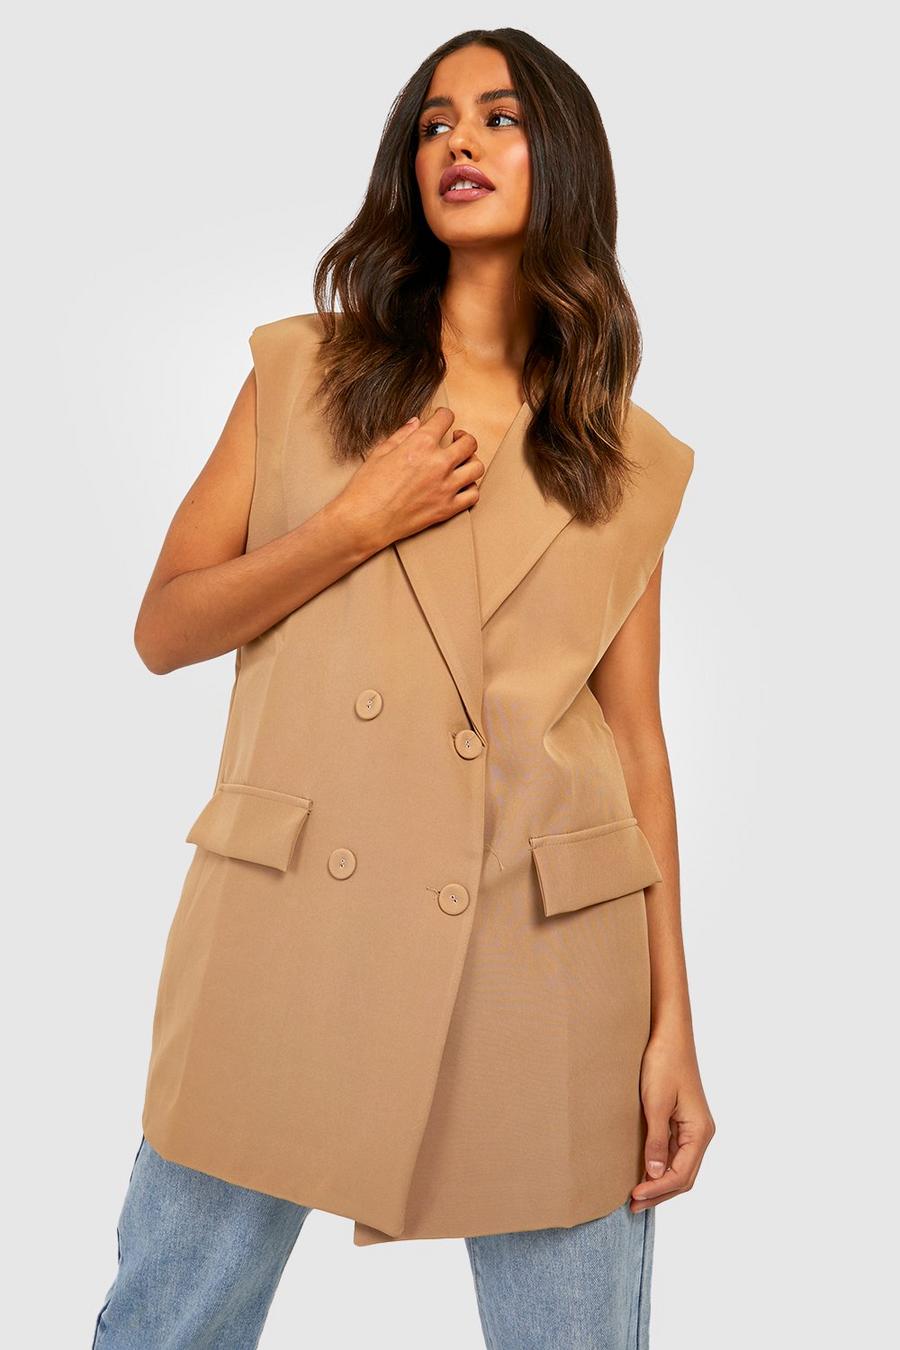 Camel beige Tailored Double Breasted Sleeveless Blazer